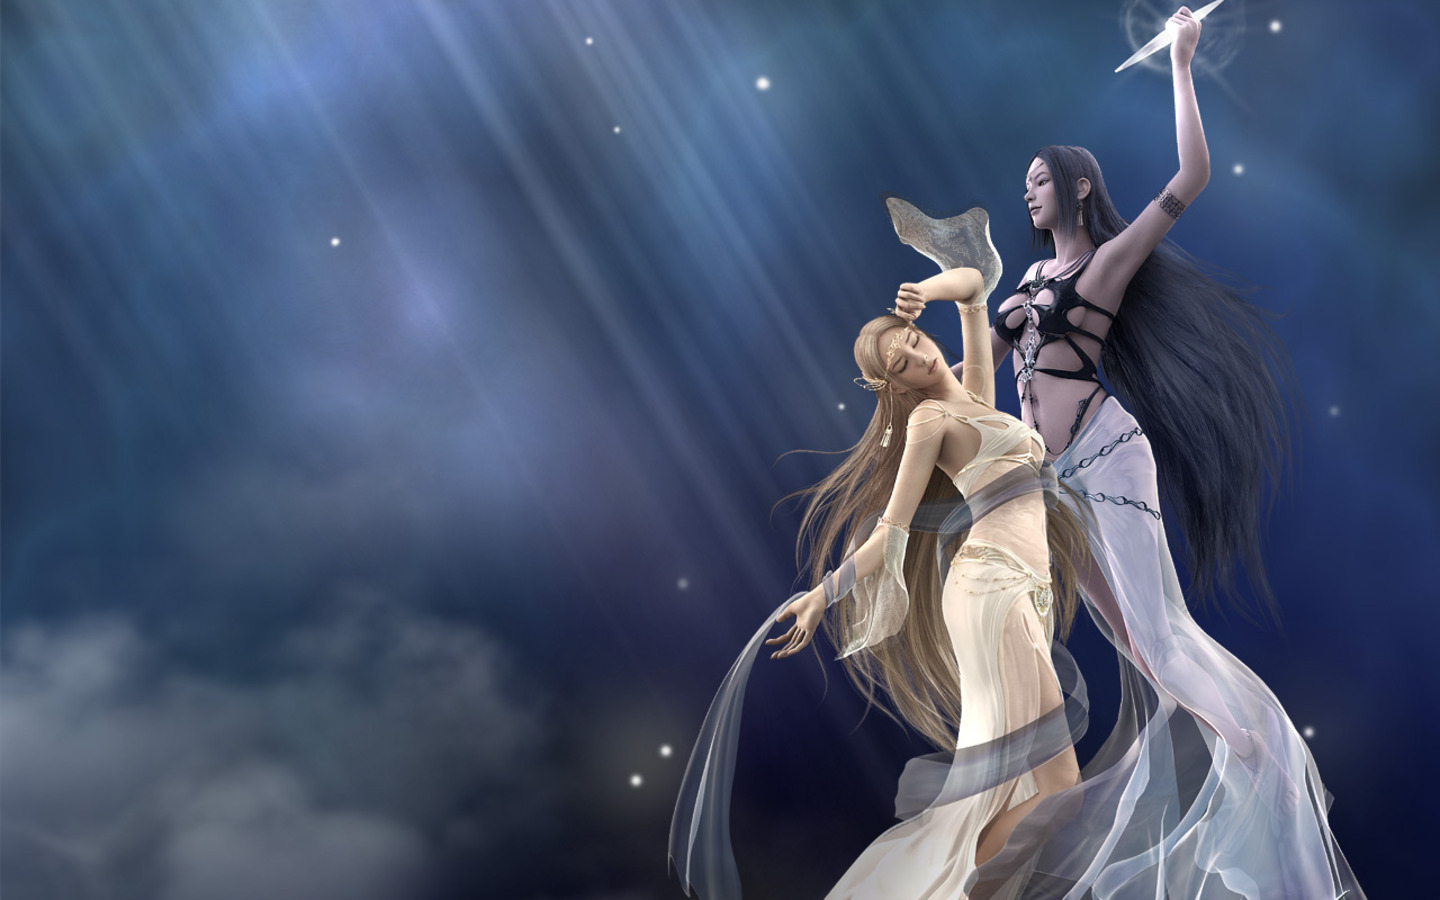 cool wallpapers for girls,cg artwork,sky,anime,fictional character,space